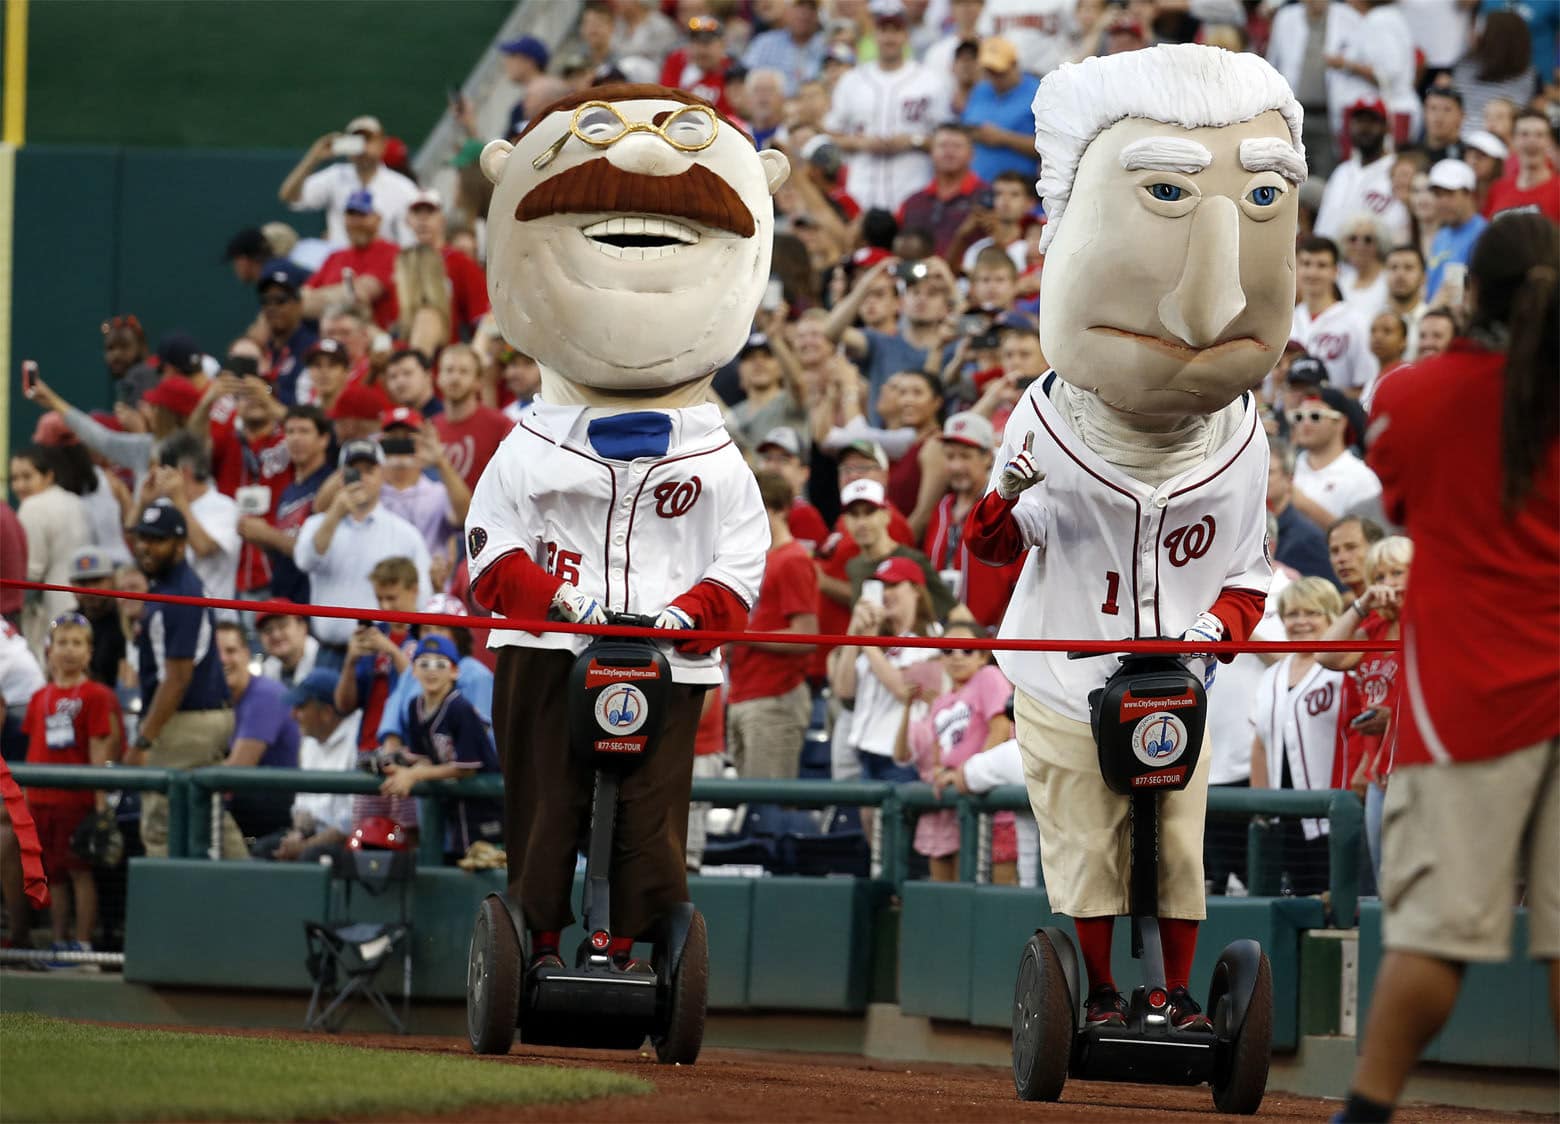 Washington Nationals Racing Presidents, President Teddy Roosevelt and President George Washington use Segways during their race during a baseball game against the Chicago Cubs at Nationals Park, Monday, June 13, 2016, in Washington. (AP Photo/Alex Brandon)